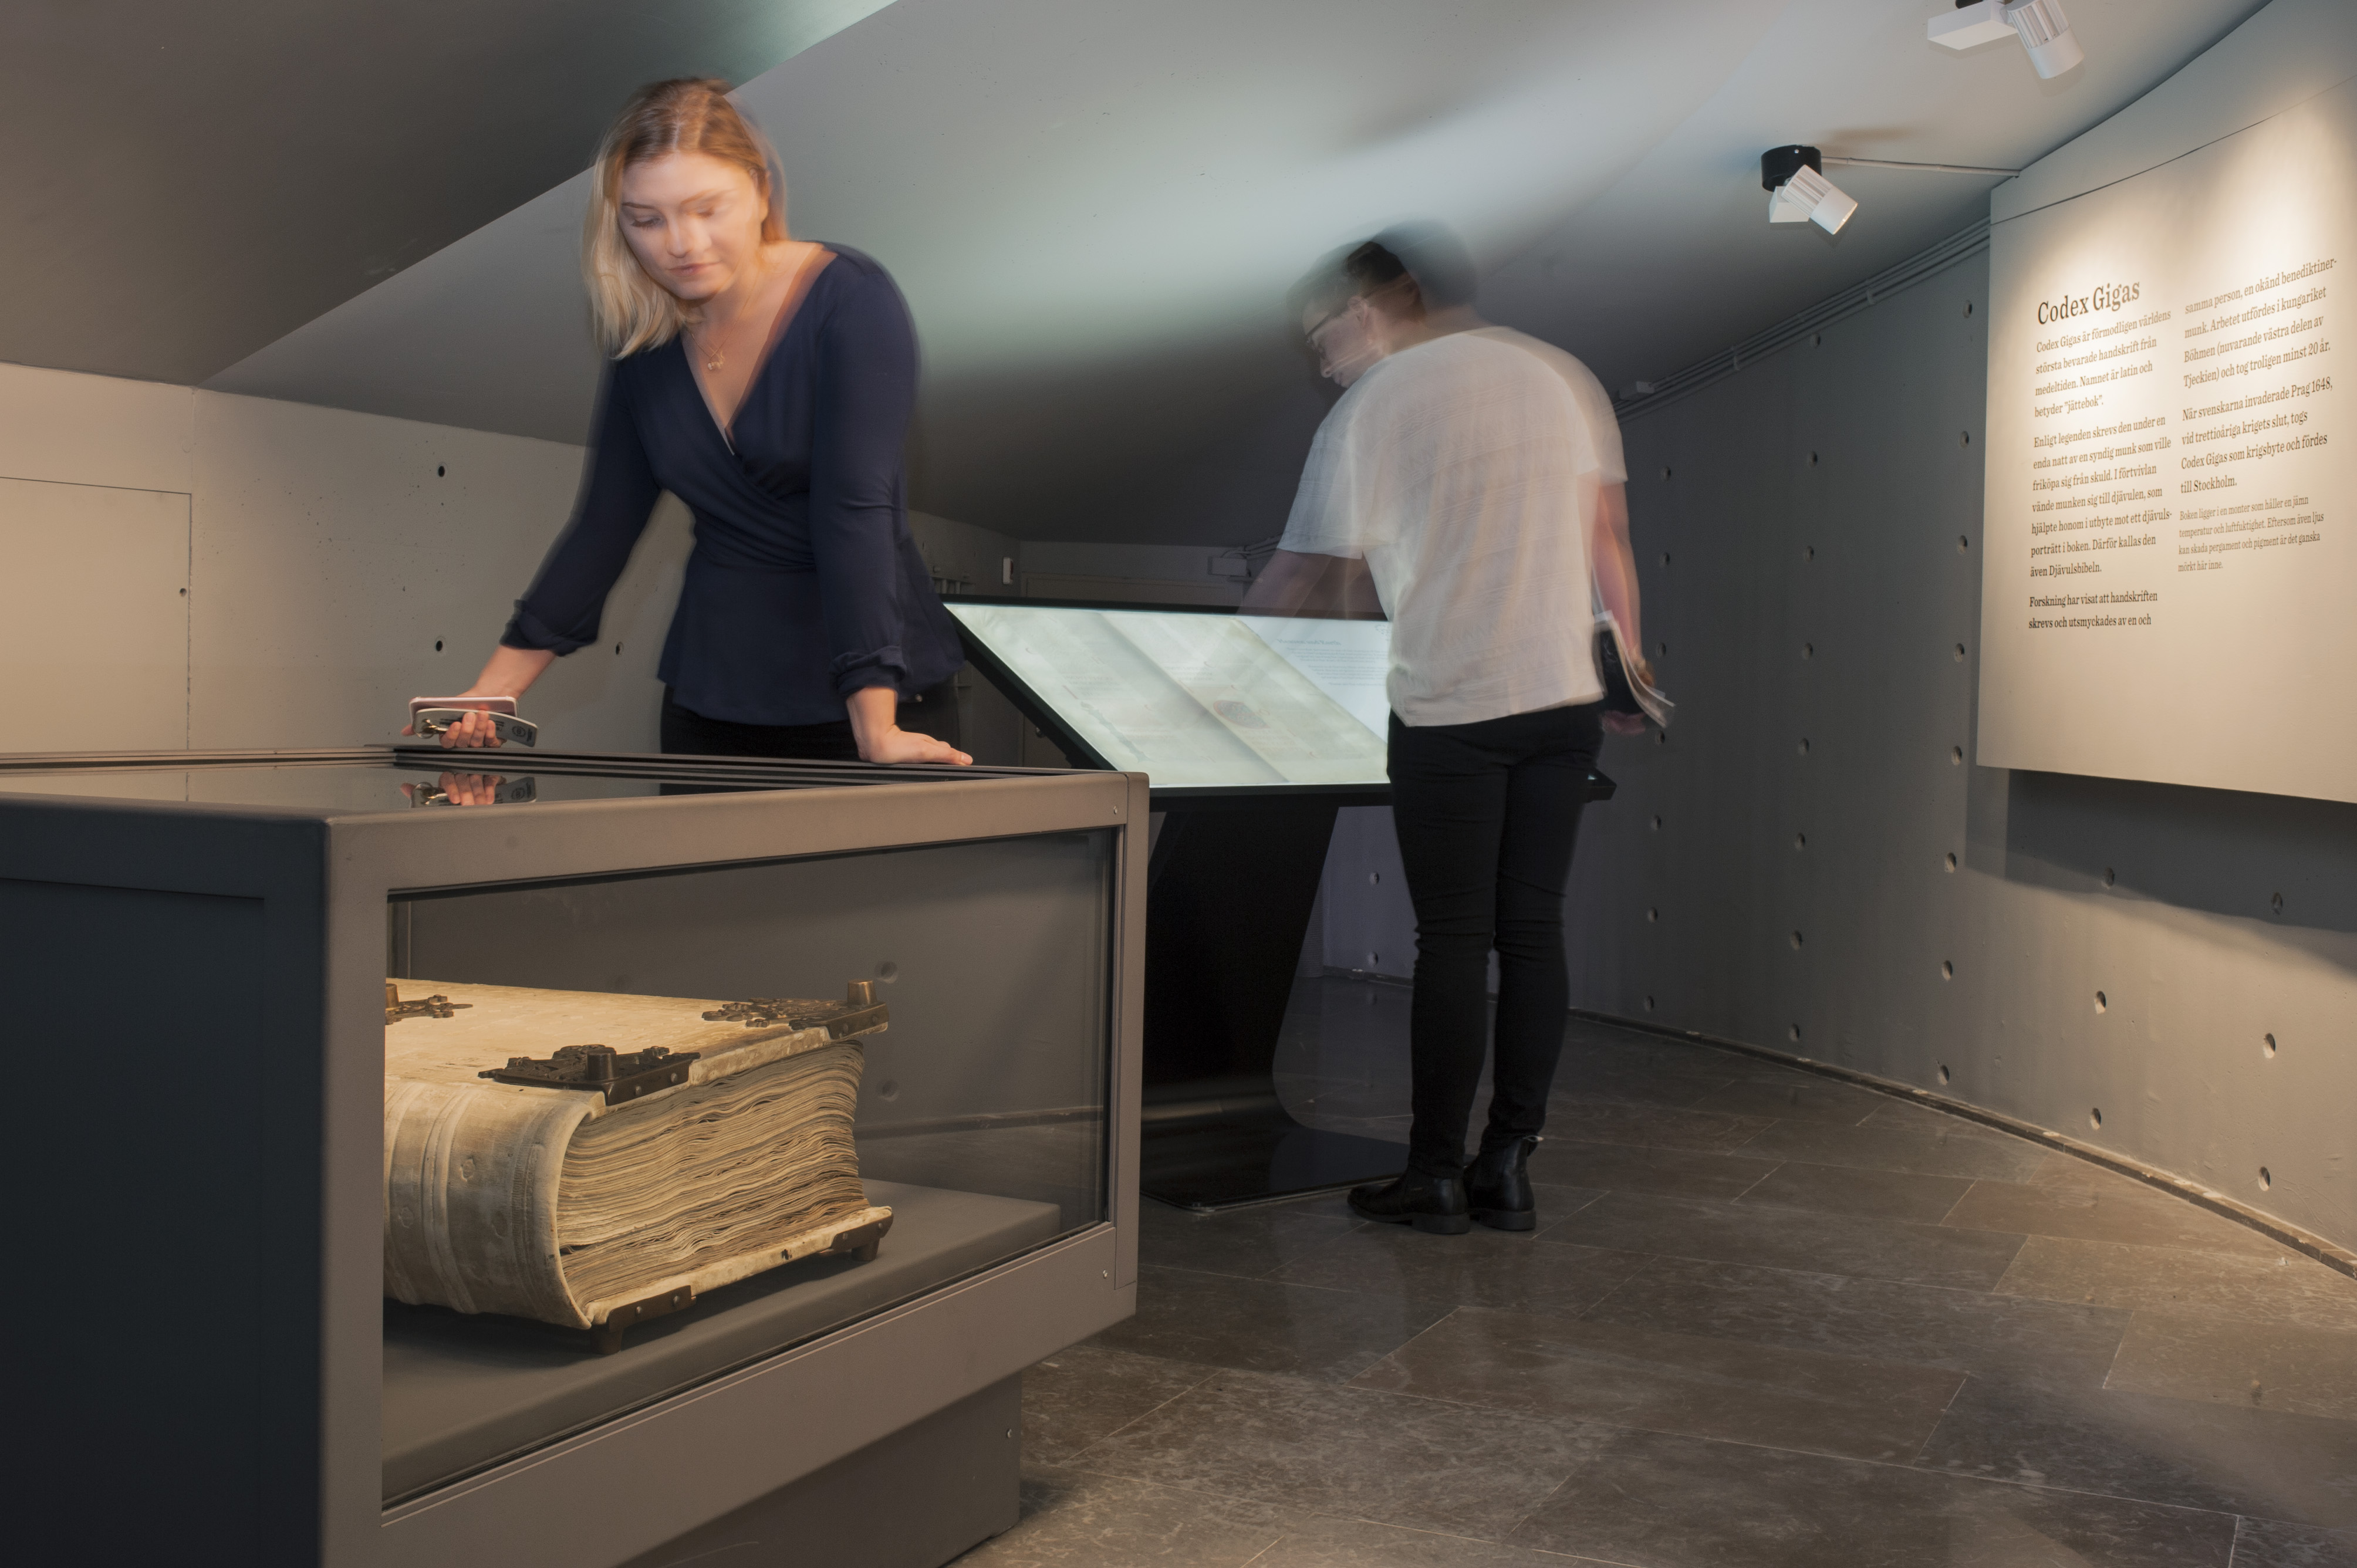 An exhibition with a big book within a glass case and two people looking around. 